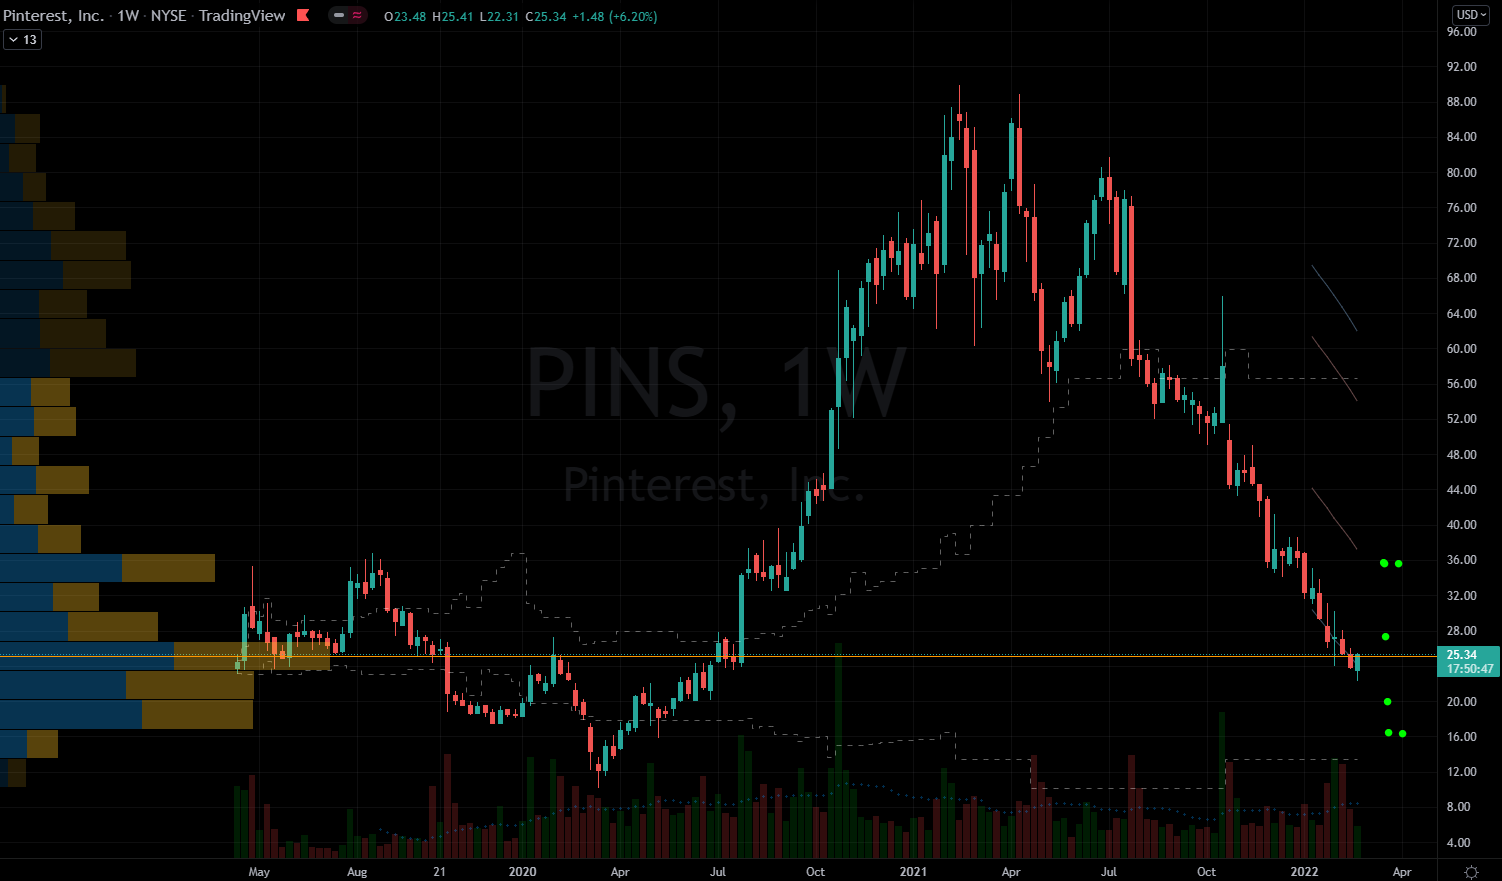 Charts by TradingView Pinterest (PINS) Stock Chart Showing Tough Resistance